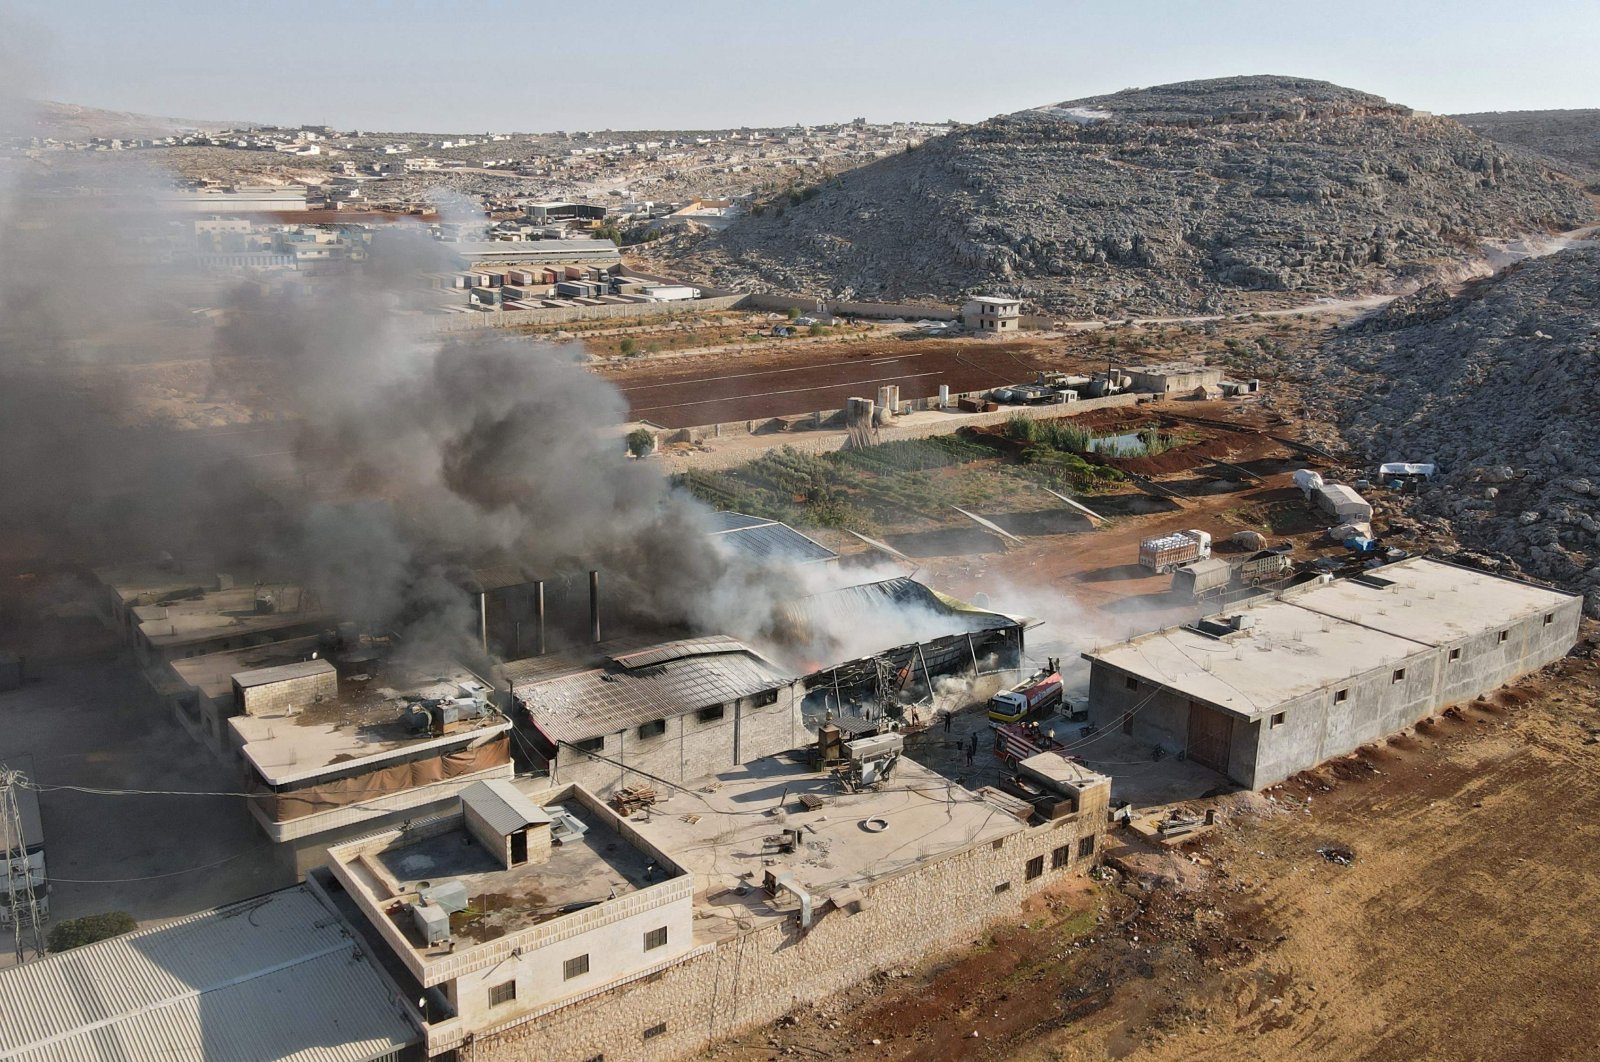 An aerial view shows smoke billowing from a warehouse after reported shelling on the town of Sarmada in Idlib province, northwestern Syria, Oct. 16, 2021. (AFP Photo)